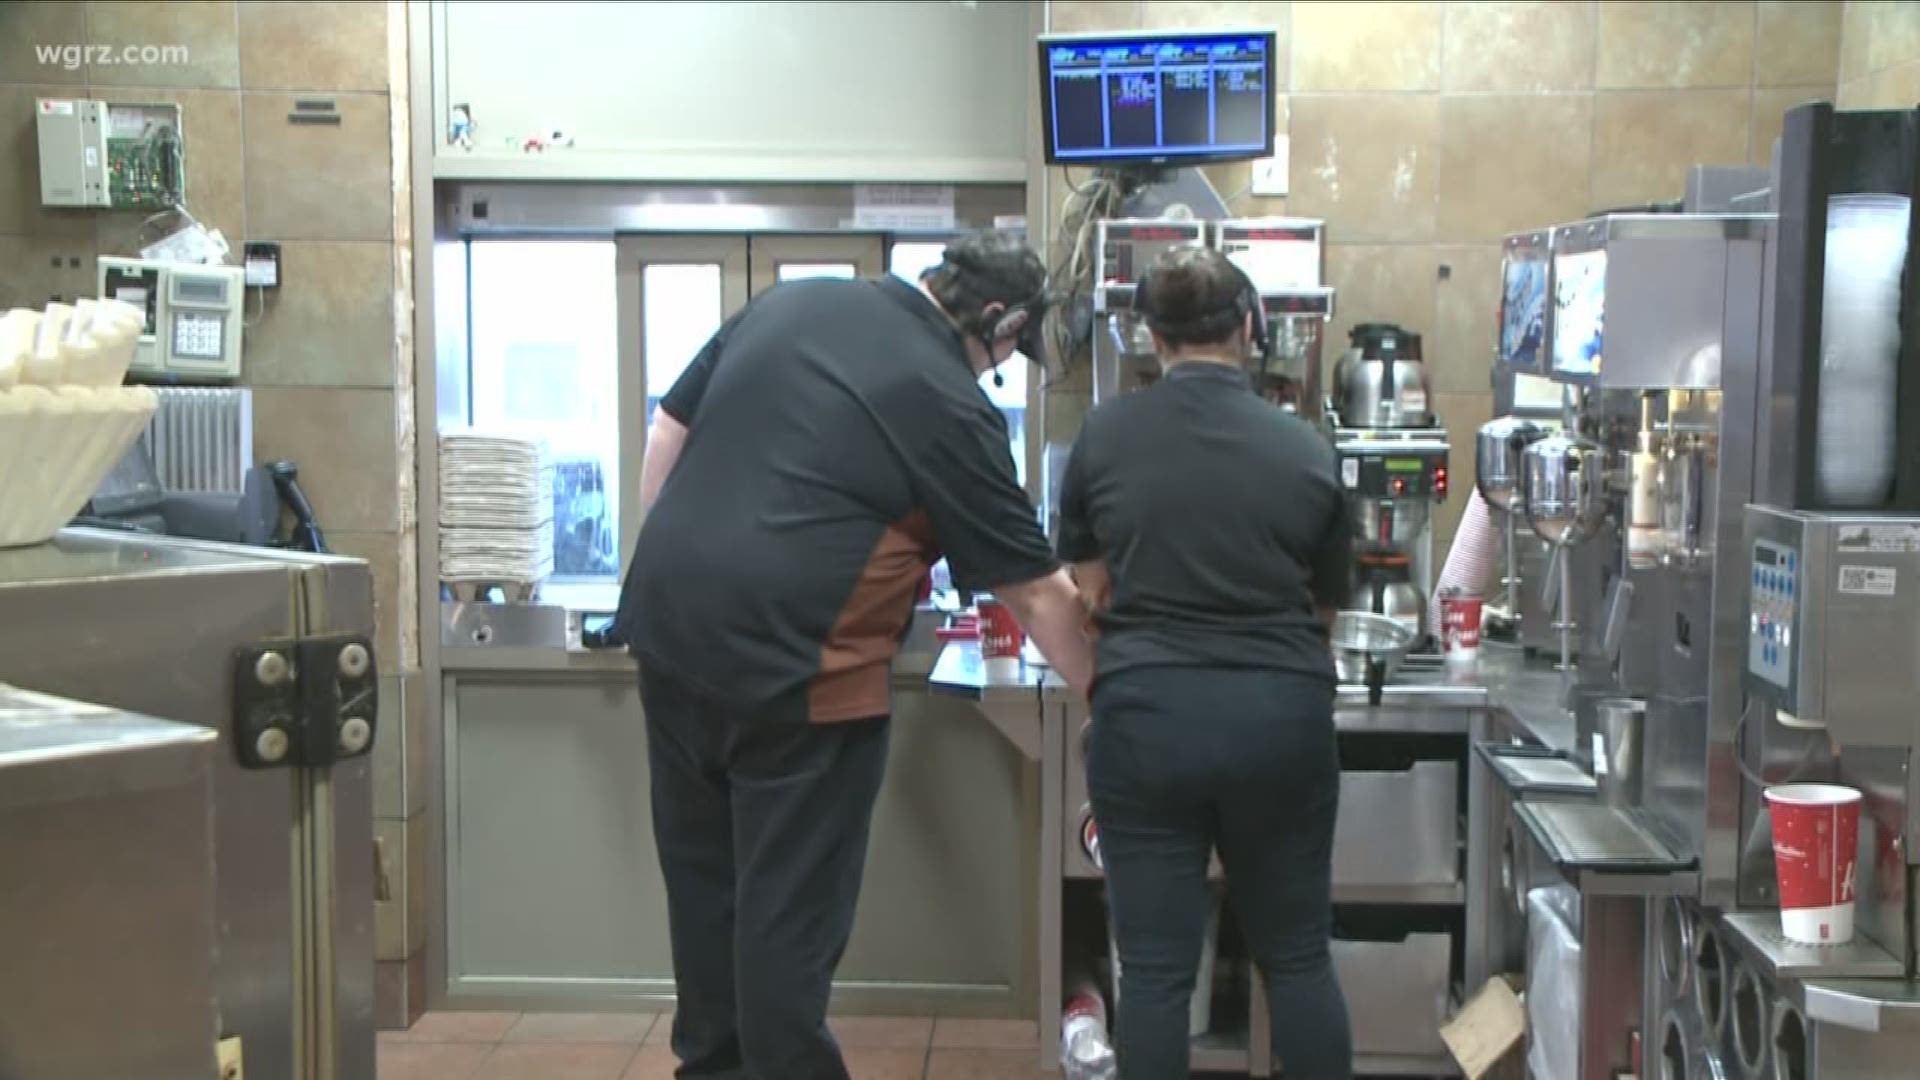 Employees at Tim Hortons are dealing with the aftermath of a coworker, Jessica Cameron, who was set on fire in the restaurant's parking lot, on Monday.